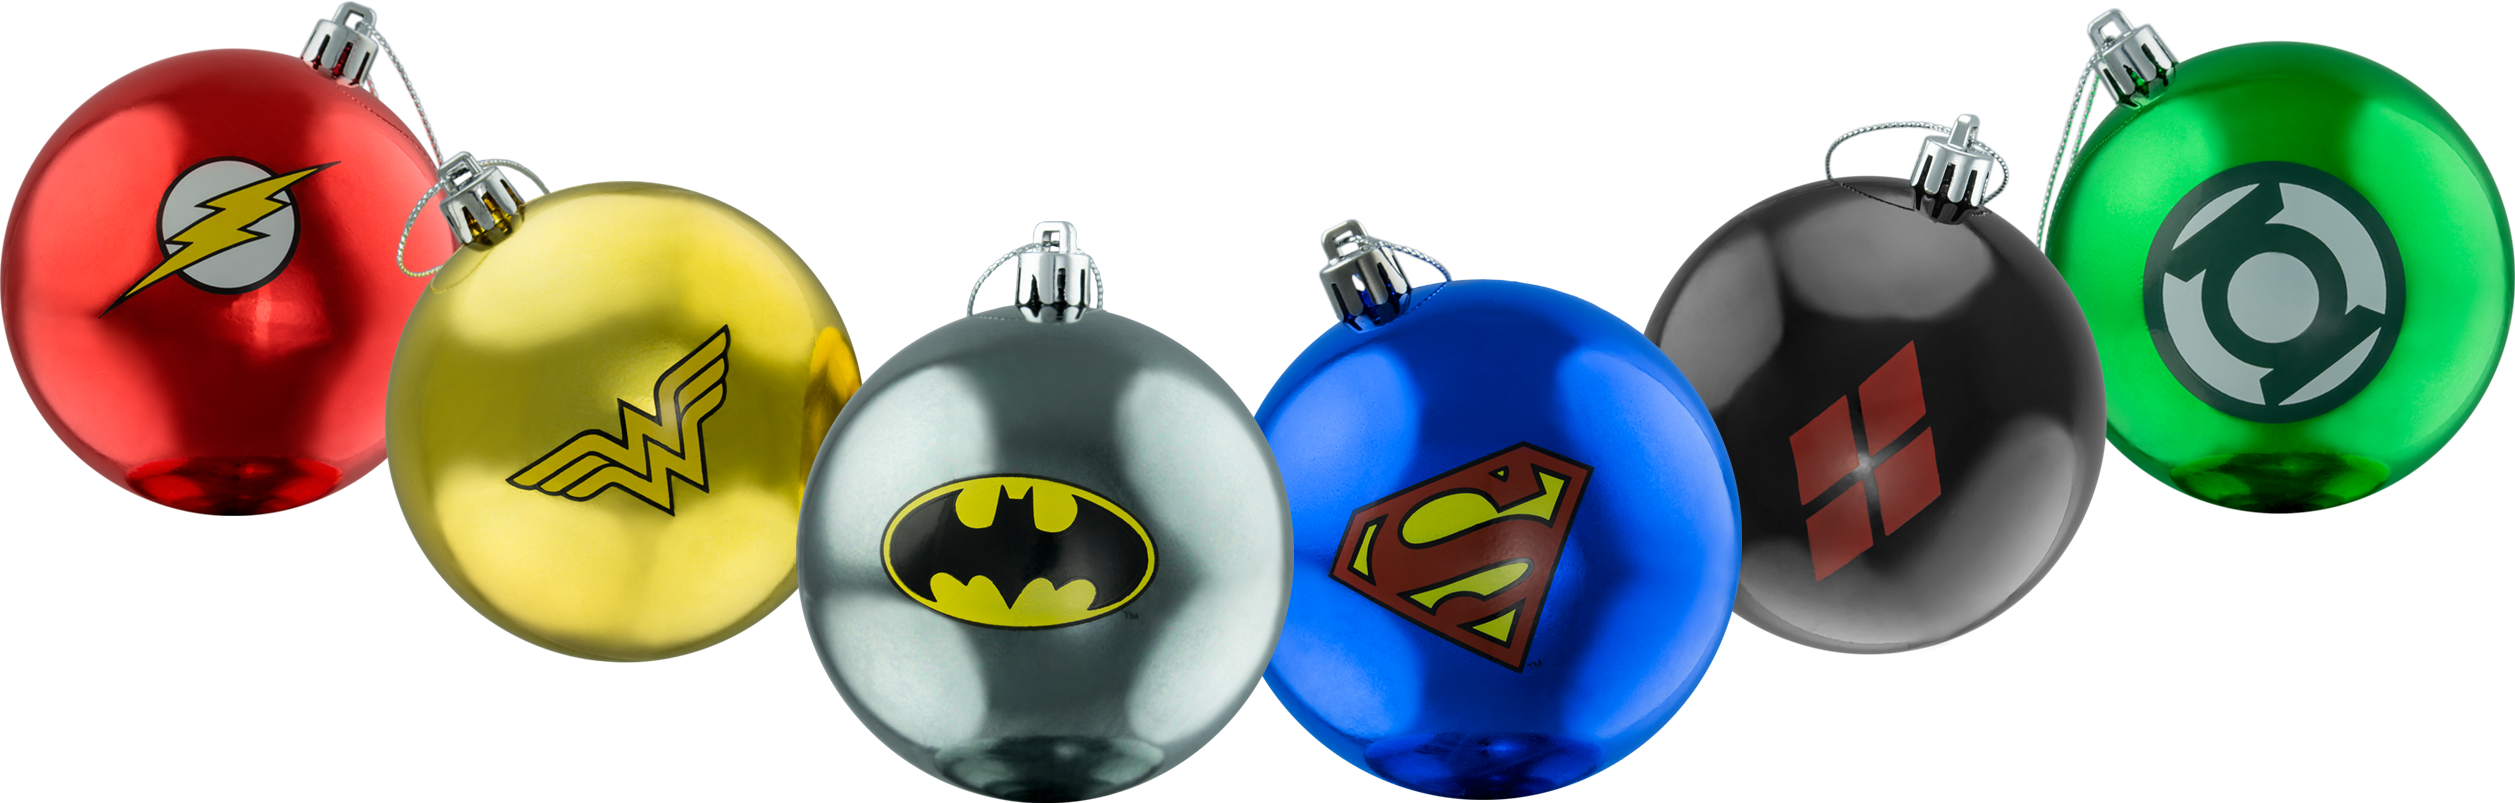 Christmas Baubles PNG Image